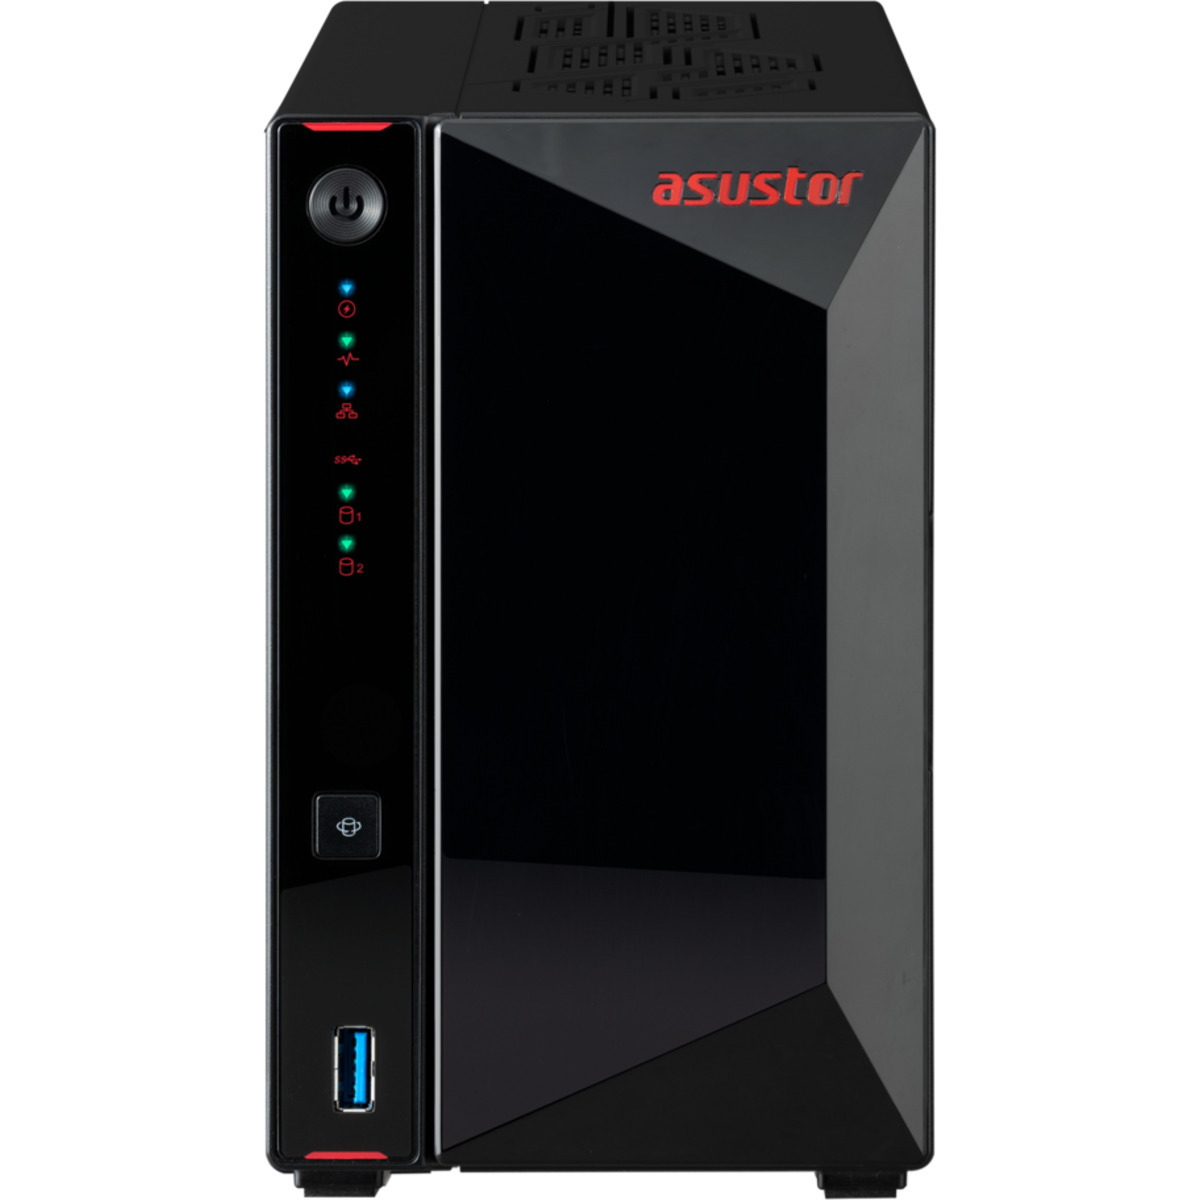 ASUSTOR Nimbustor 2 Gen2 AS5402T 36tb 2-Bay Desktop Multimedia / Power User / Business NAS - Network Attached Storage Device 2x18tb Seagate EXOS X18 ST18000NM000J 3.5 7200rpm SATA 6Gb/s HDD ENTERPRISE Class Drives Installed - Burn-In Tested - FREE RAM UPGRADE Nimbustor 2 Gen2 AS5402T